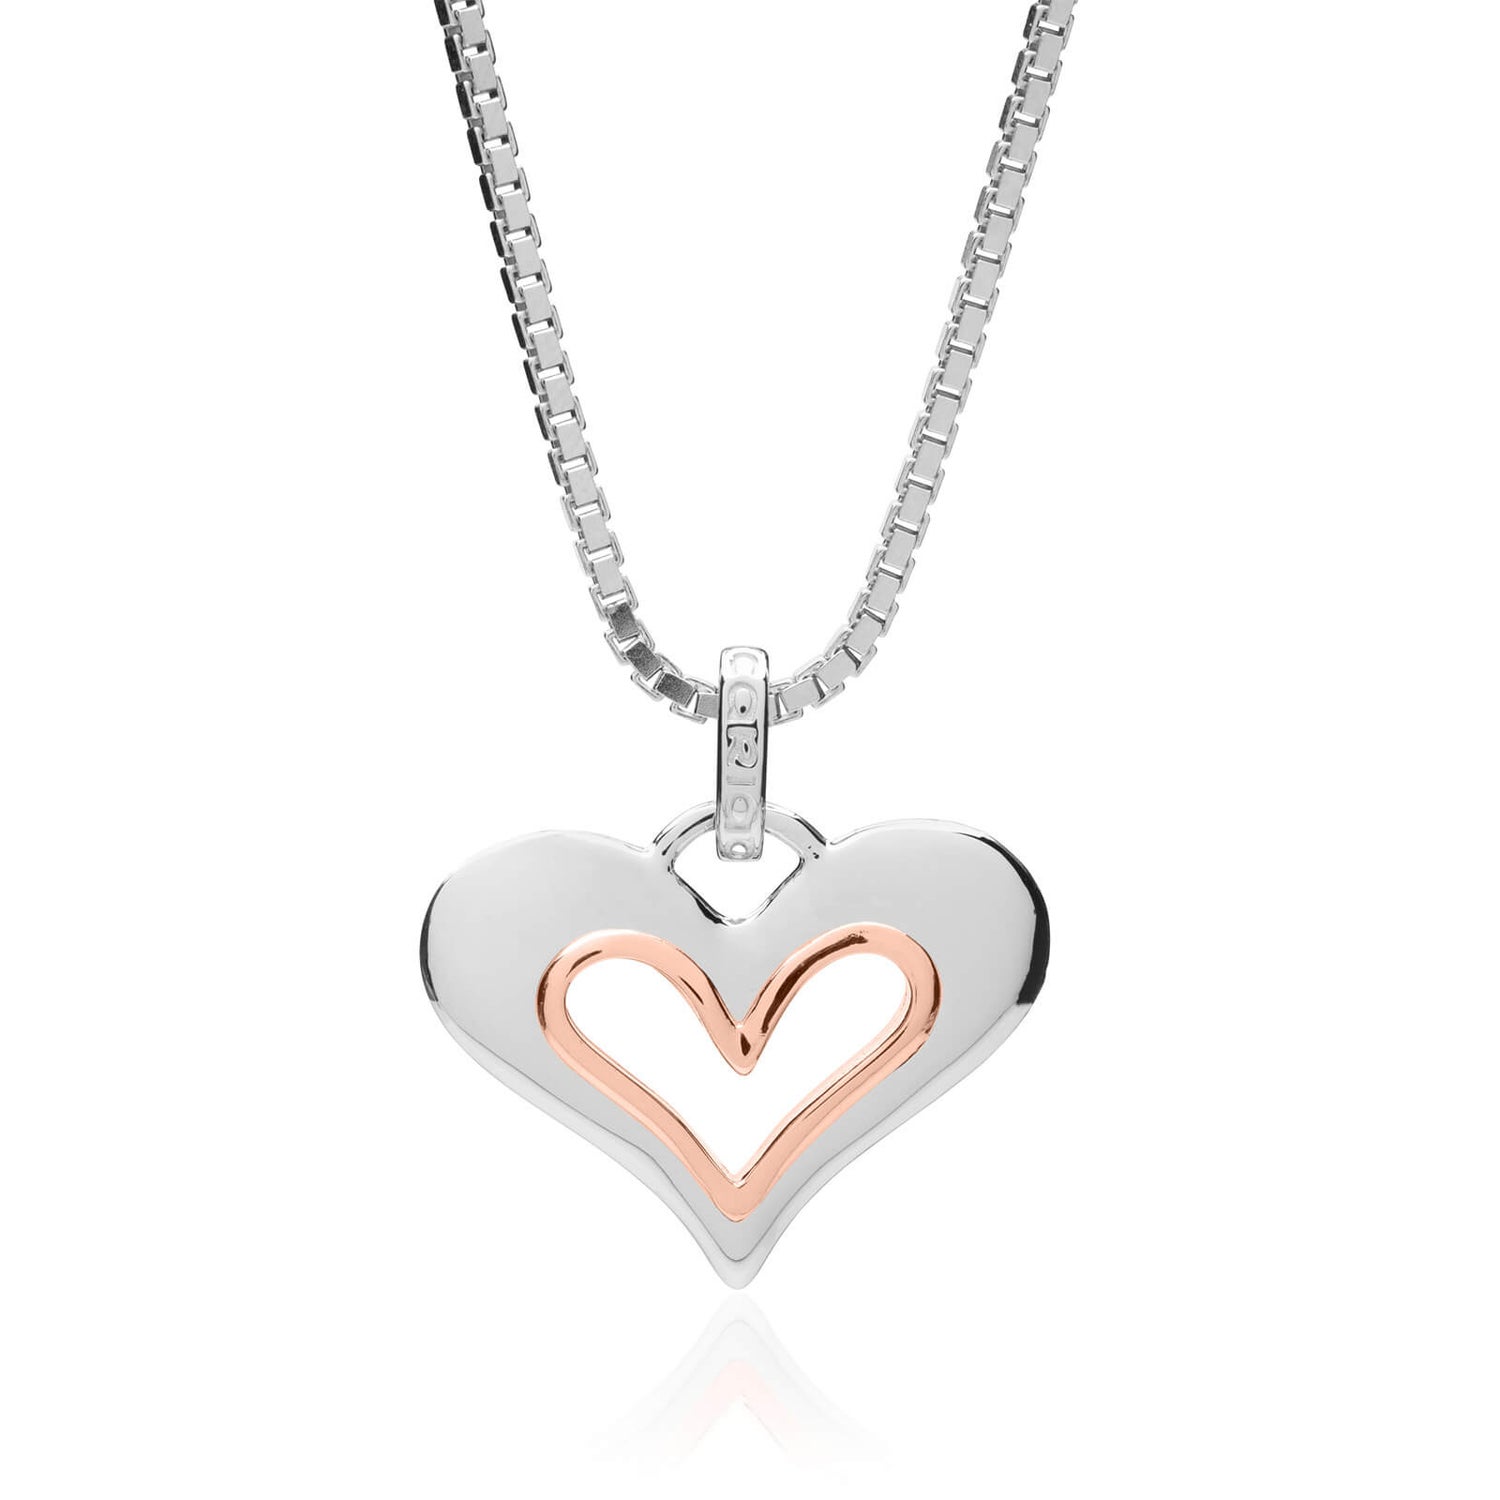 Clogau Silver And 9ct Rose Gold Cariad Heart Locket - R4849 | F.Hinds  Jewellers